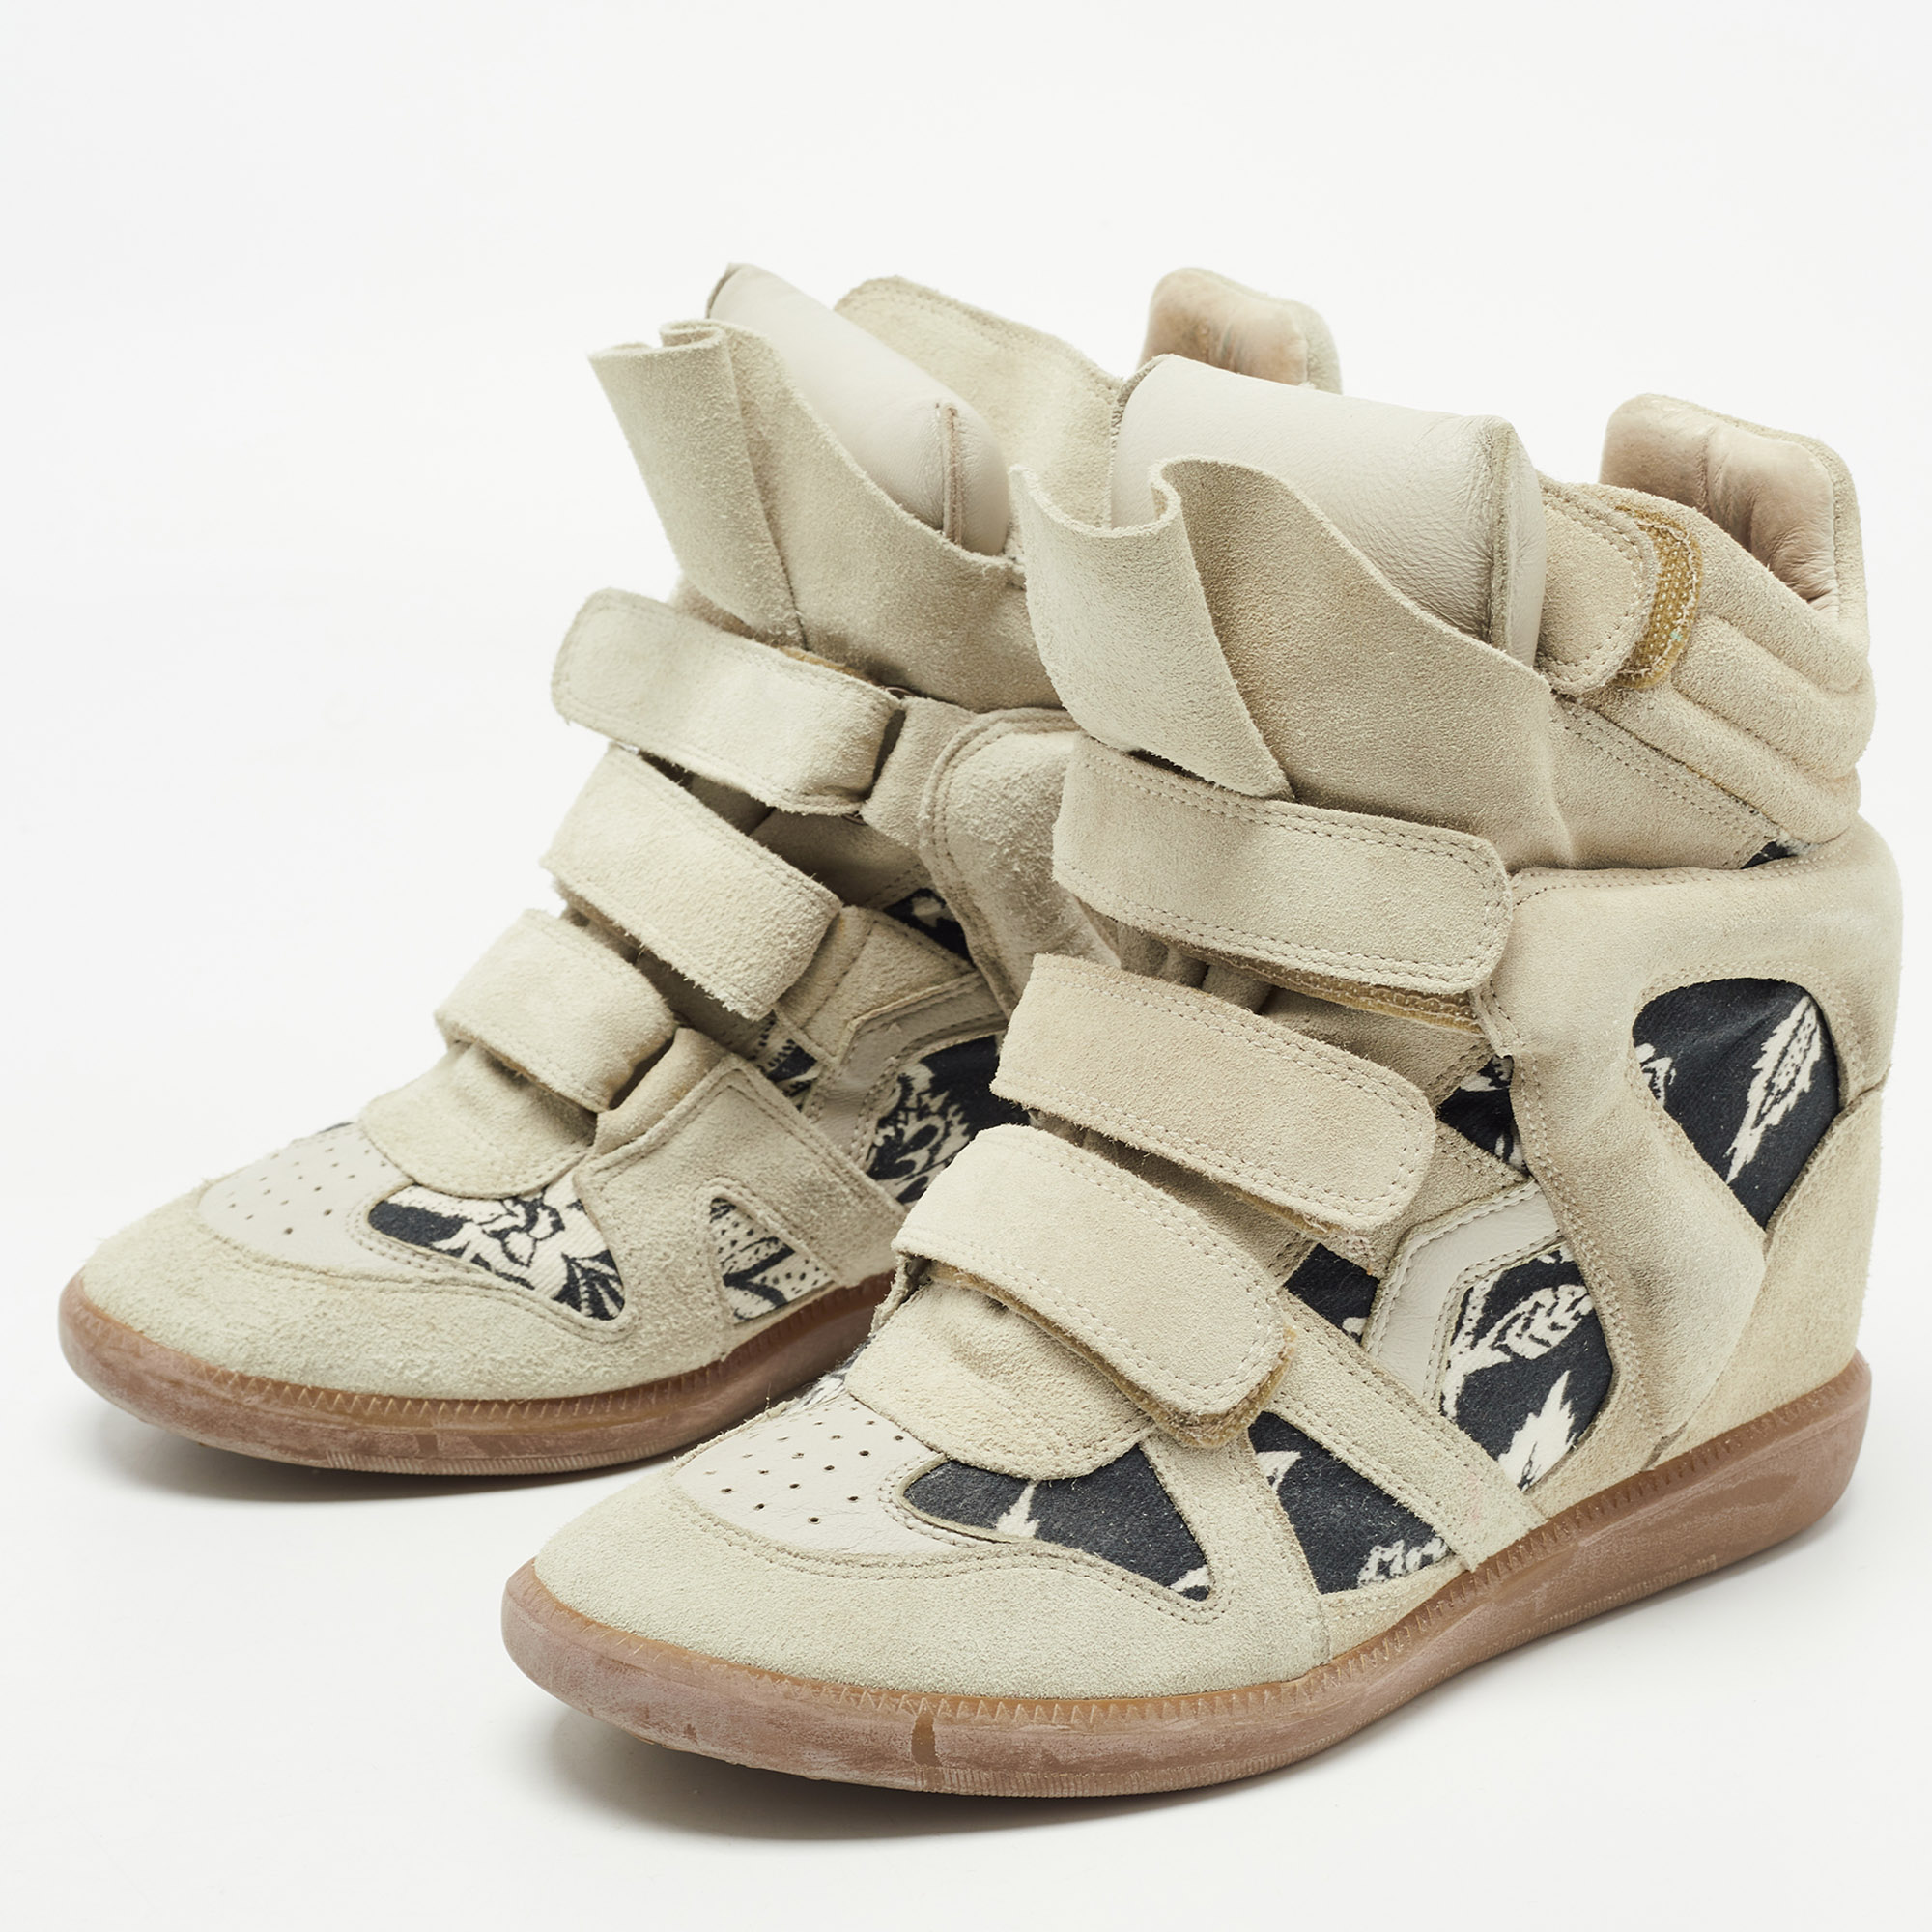 

Isabel Marant Tricolor Suede and Printed Canvas Bekett Wedge Sneakers Size, Grey